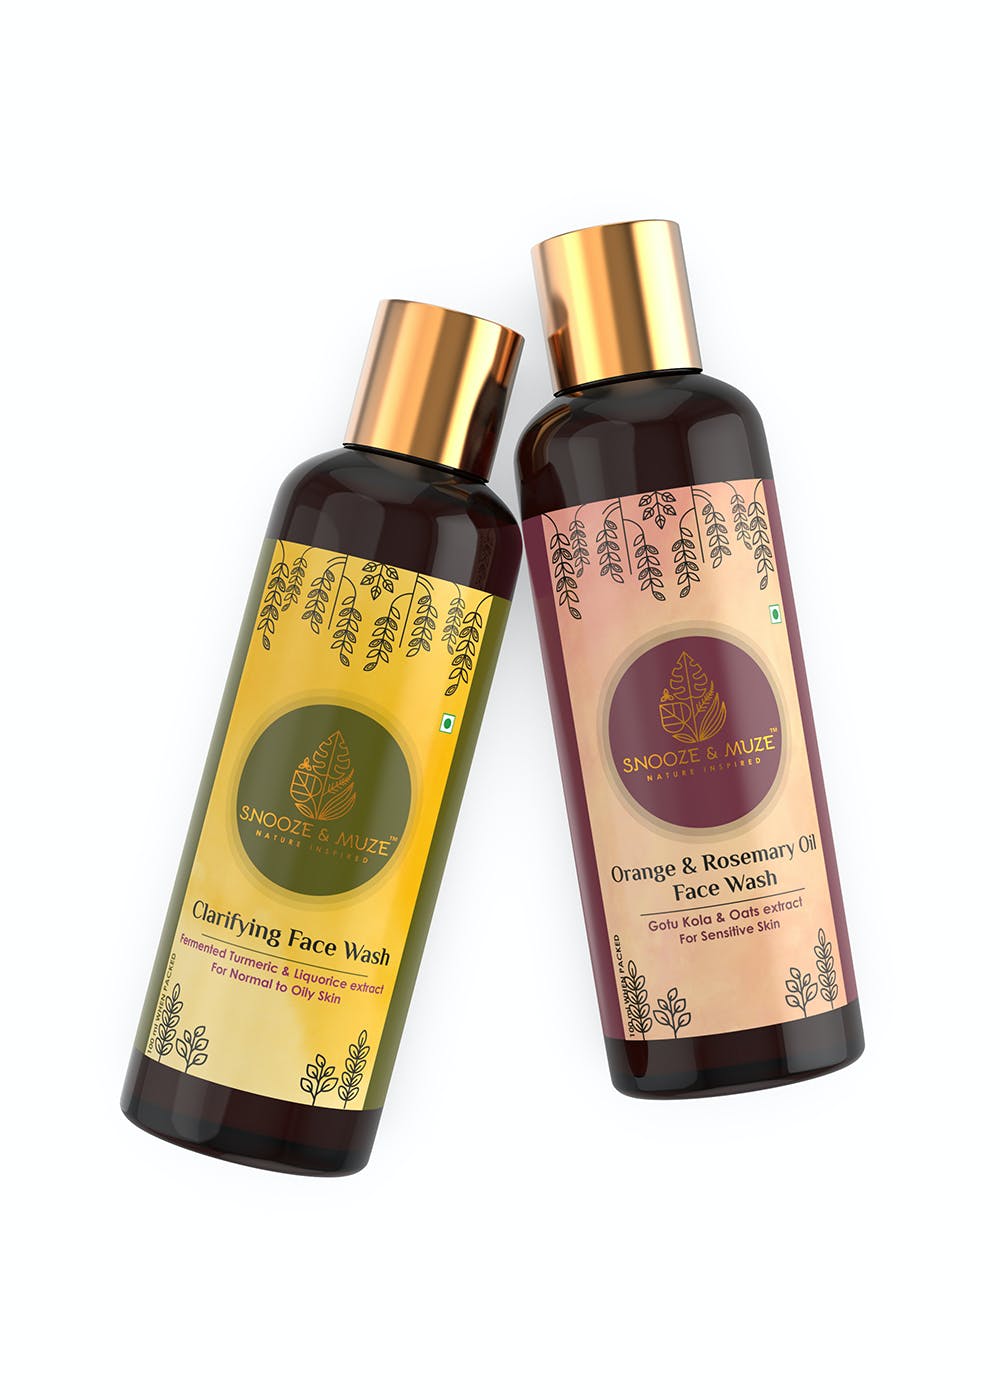 Clarifying Face Wash & Orange and Rosemary Oil Face Wash (100ml each)